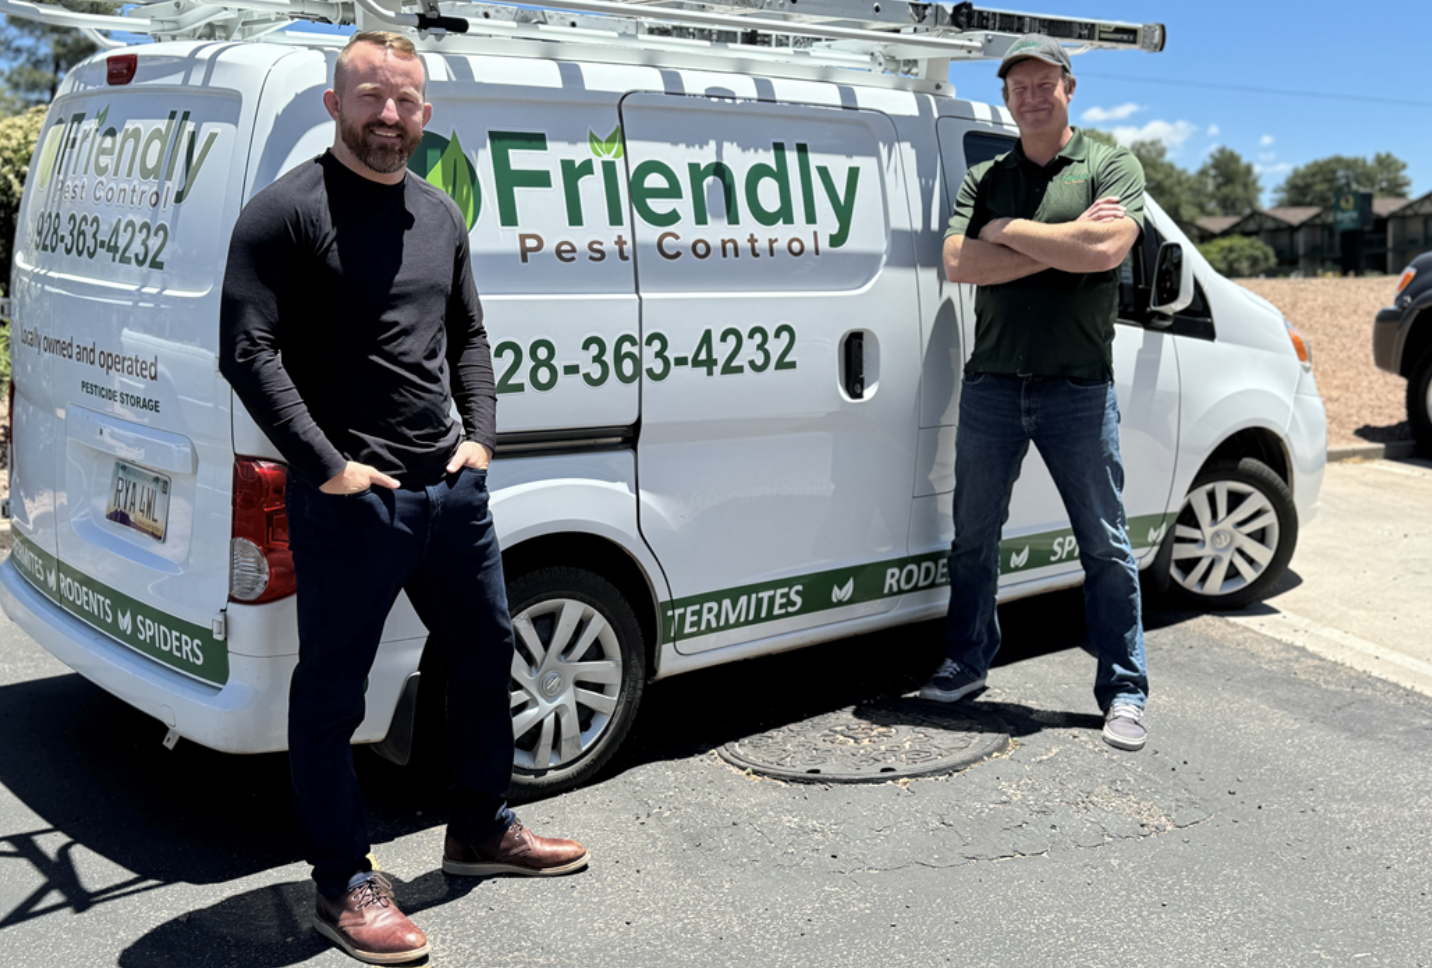 ACTION Termite and Pest Control expands into Payson with Friendly Pest Control partnership